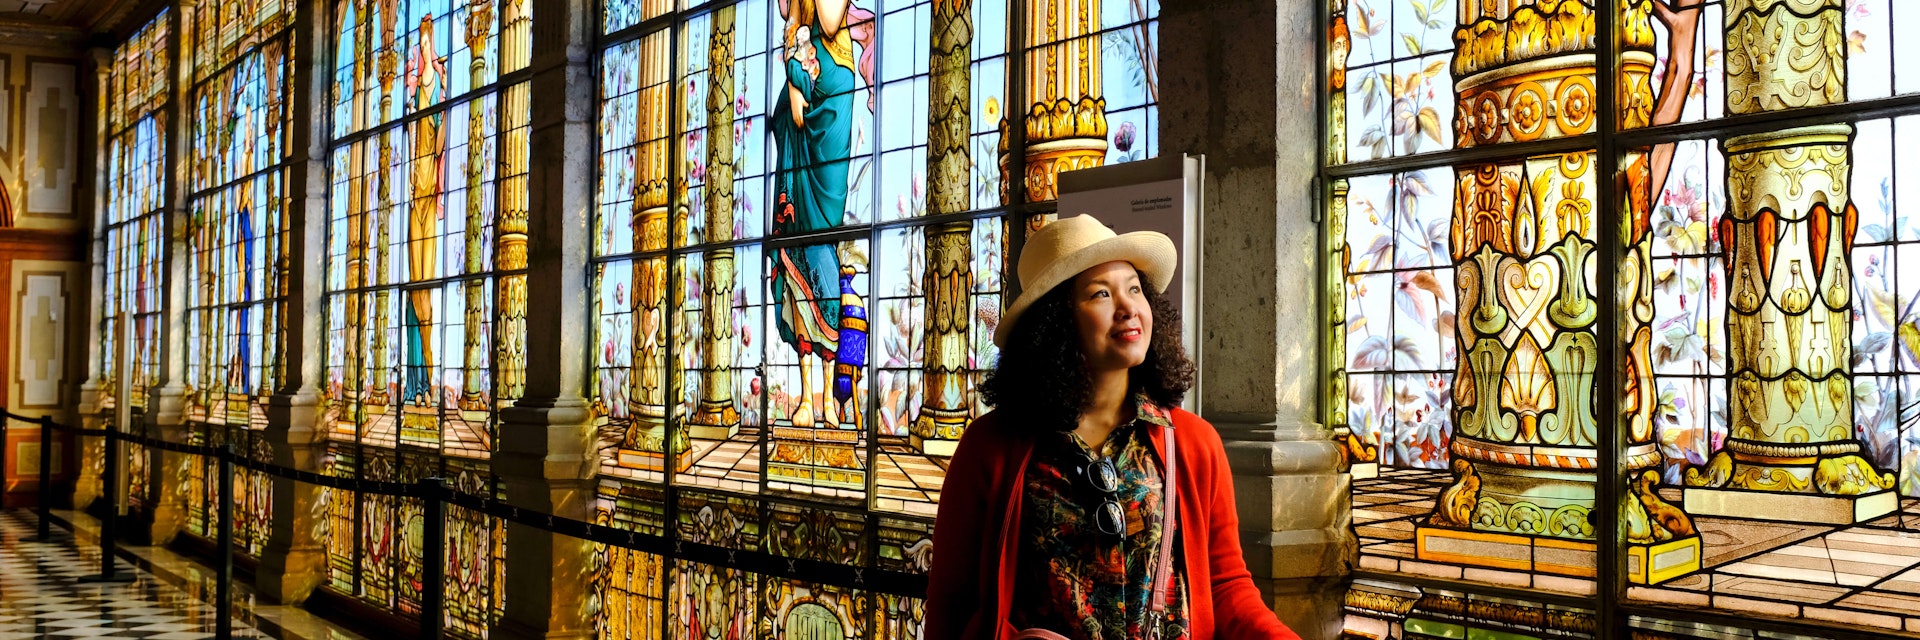 A tourist admiring the beautiful stained glass windows along a corridor inside Chapultepec Castle.